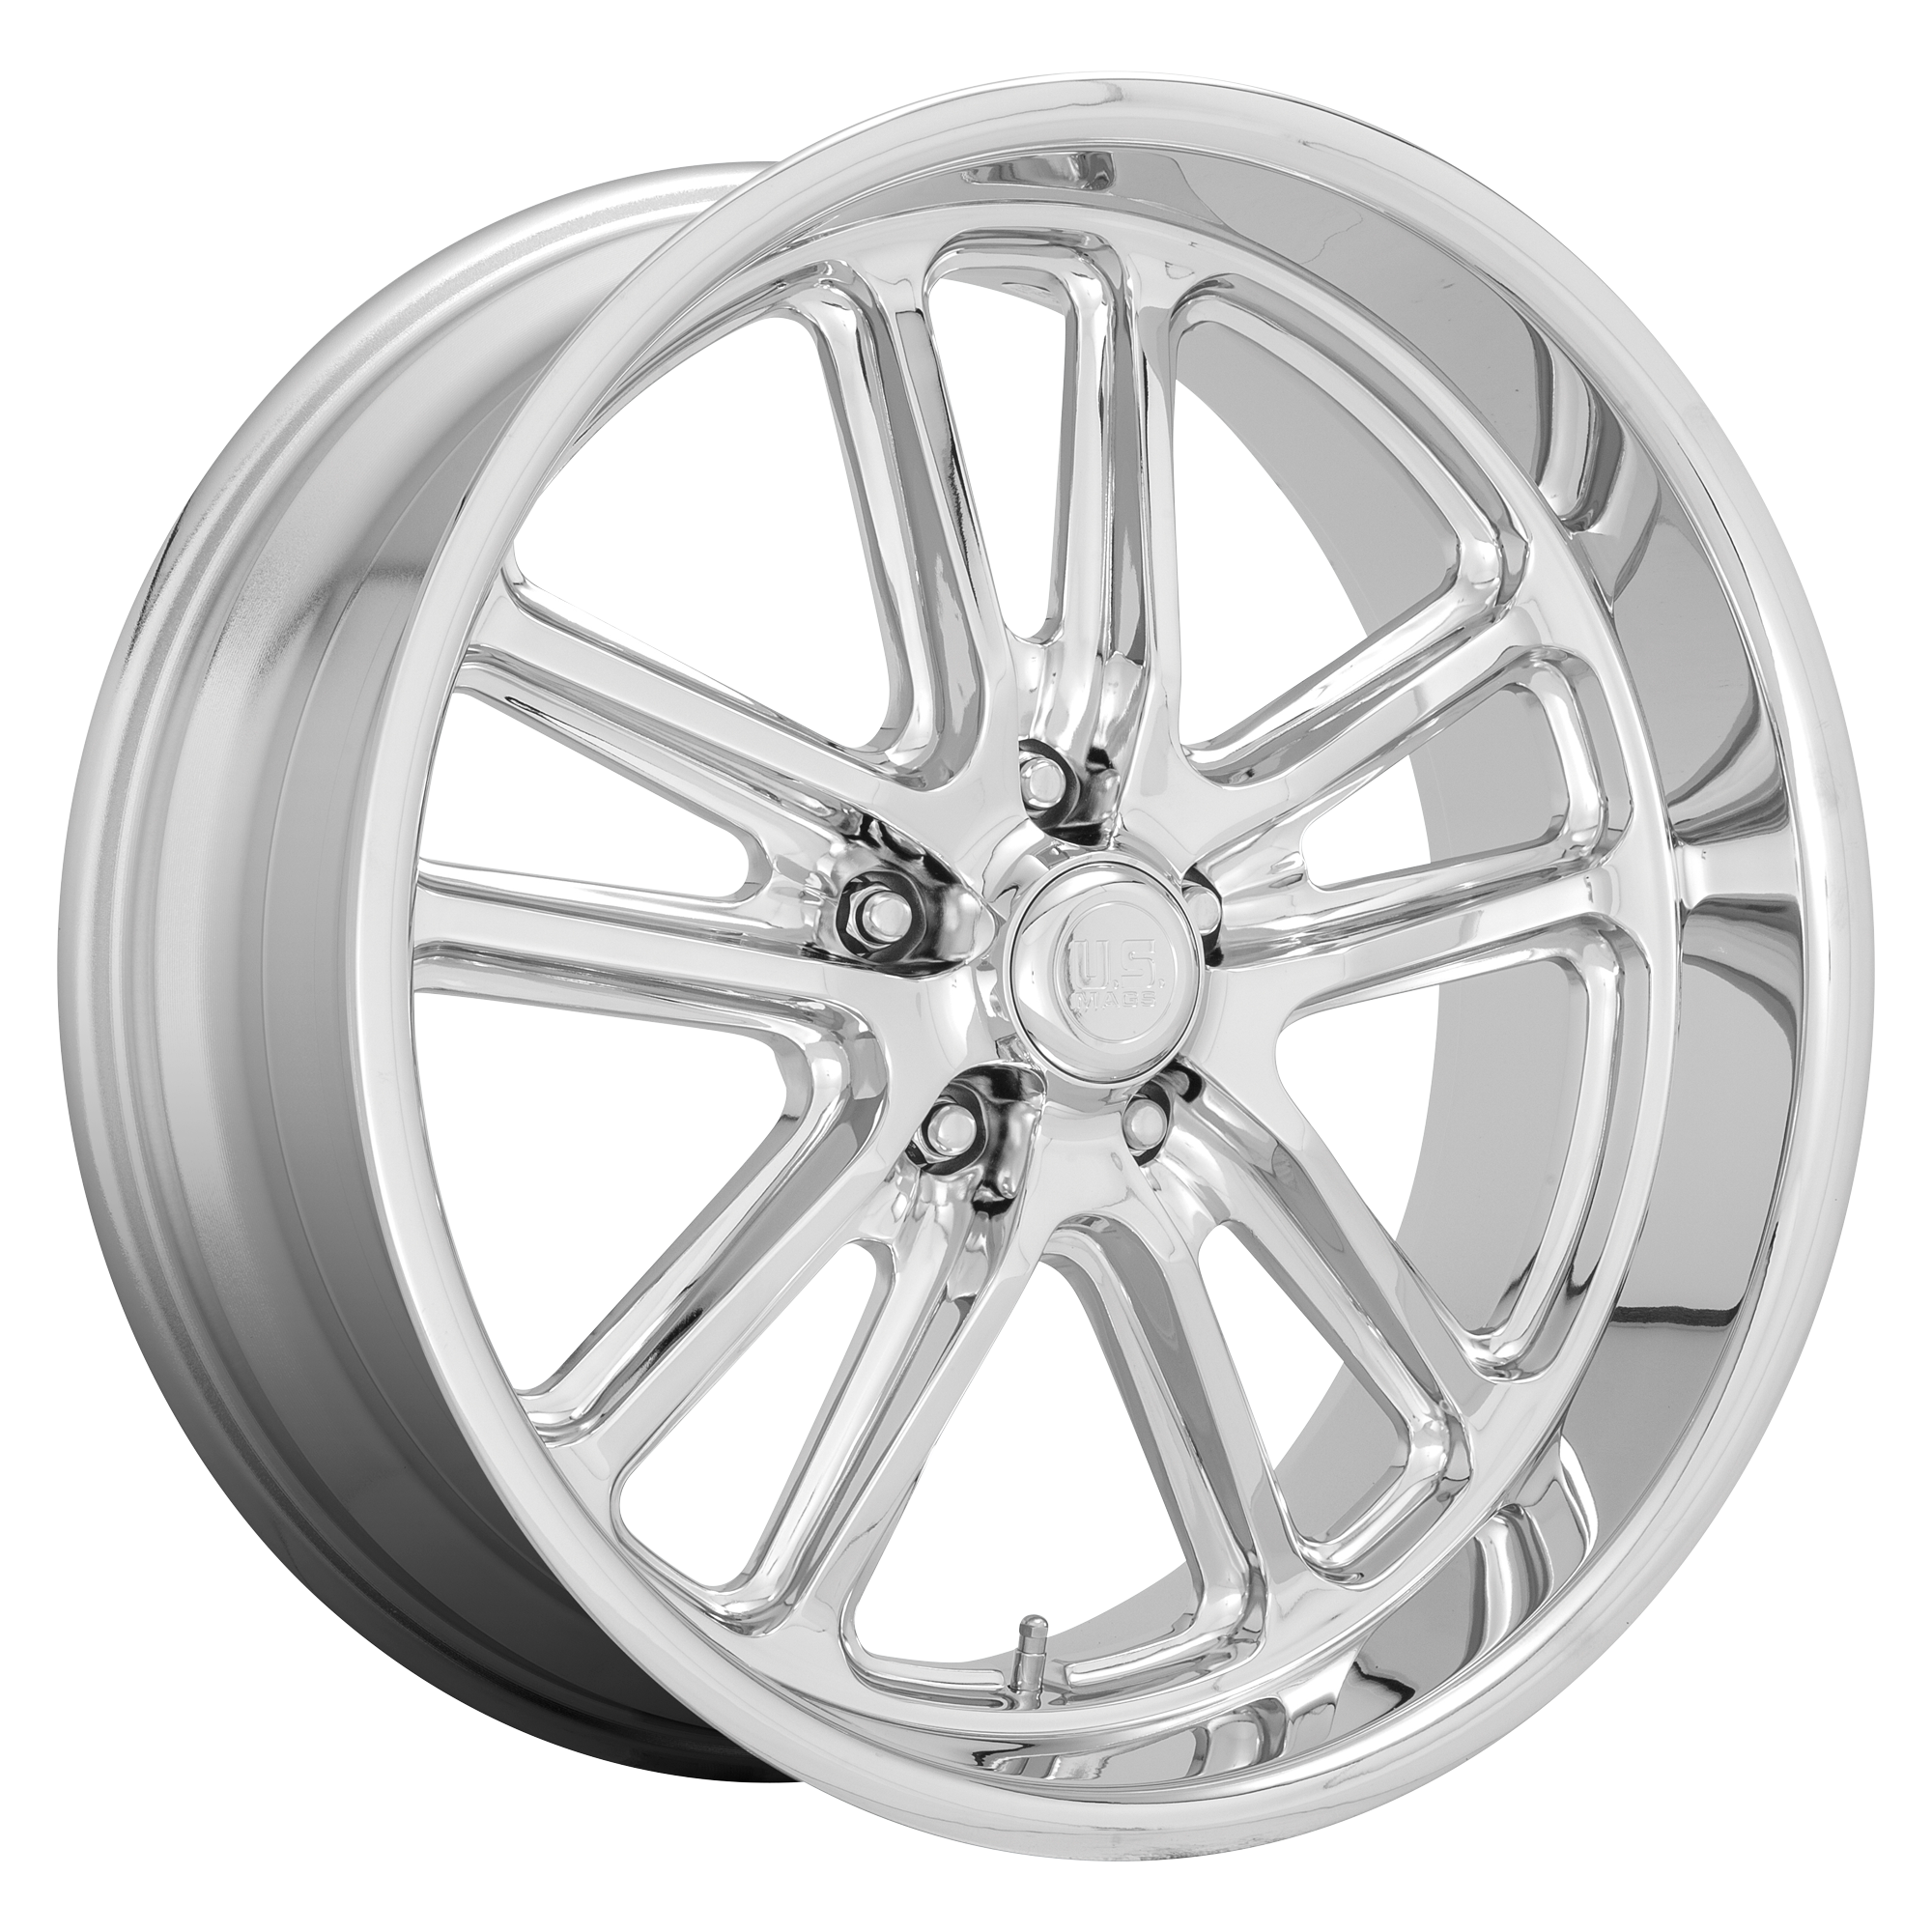 BULLET 20x9.5 5x127.00 CHROME (1 mm) - Tires and Engine Performance